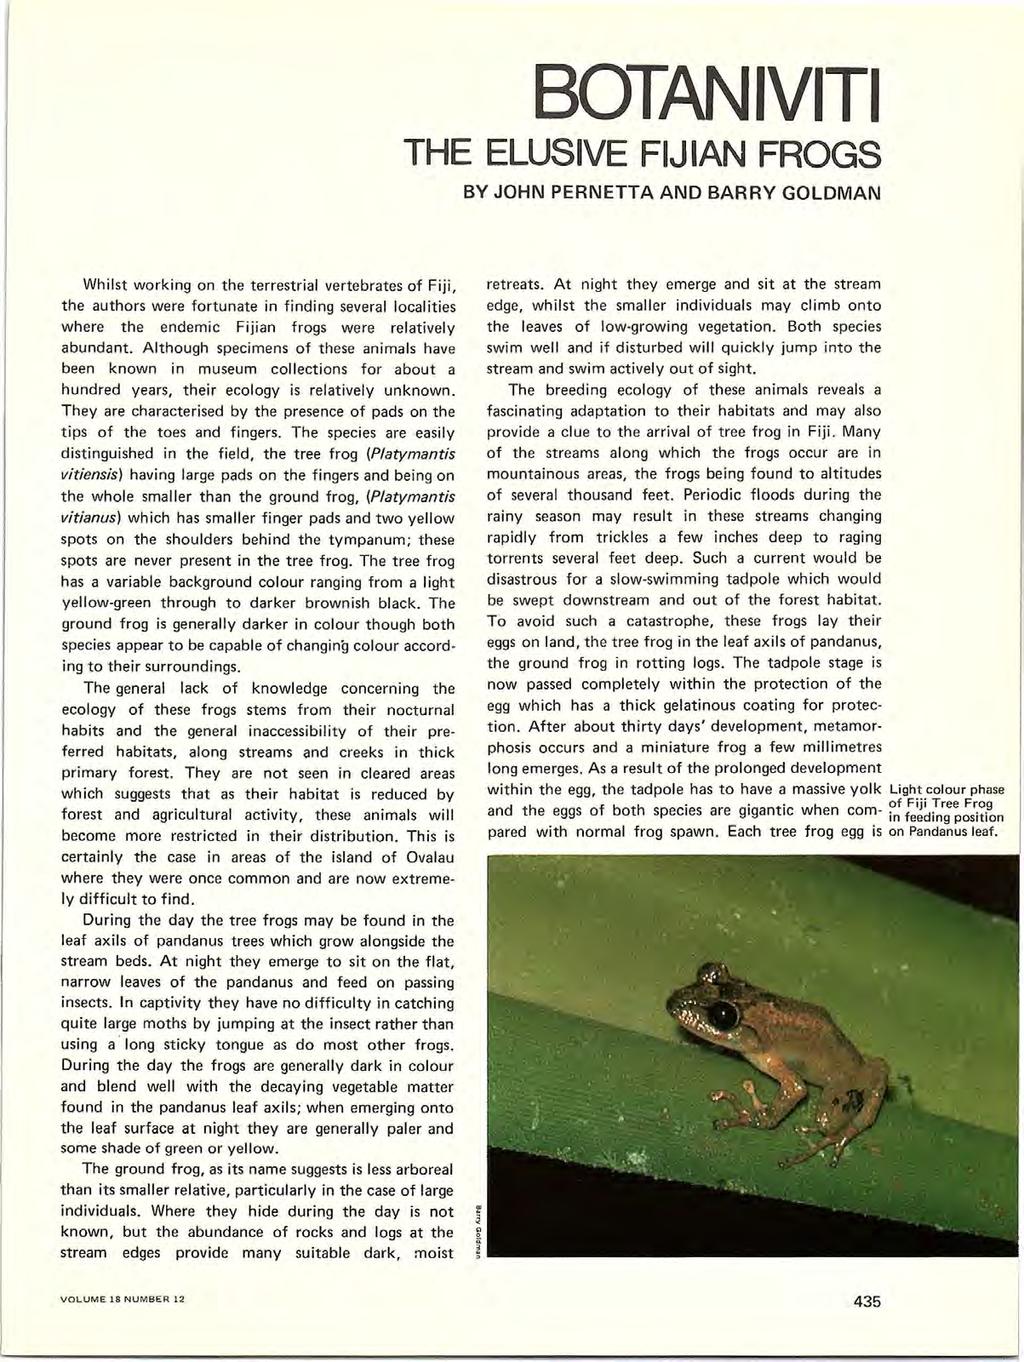 BOTANIVITI THE ELUSIVE FIJIAN FROGS BY JOHN PERNETTA AND BARRY GOLDMAN Whilst working on the terrestrial vertebrates of Fiji, the authors were fortunate in finding several localities where the